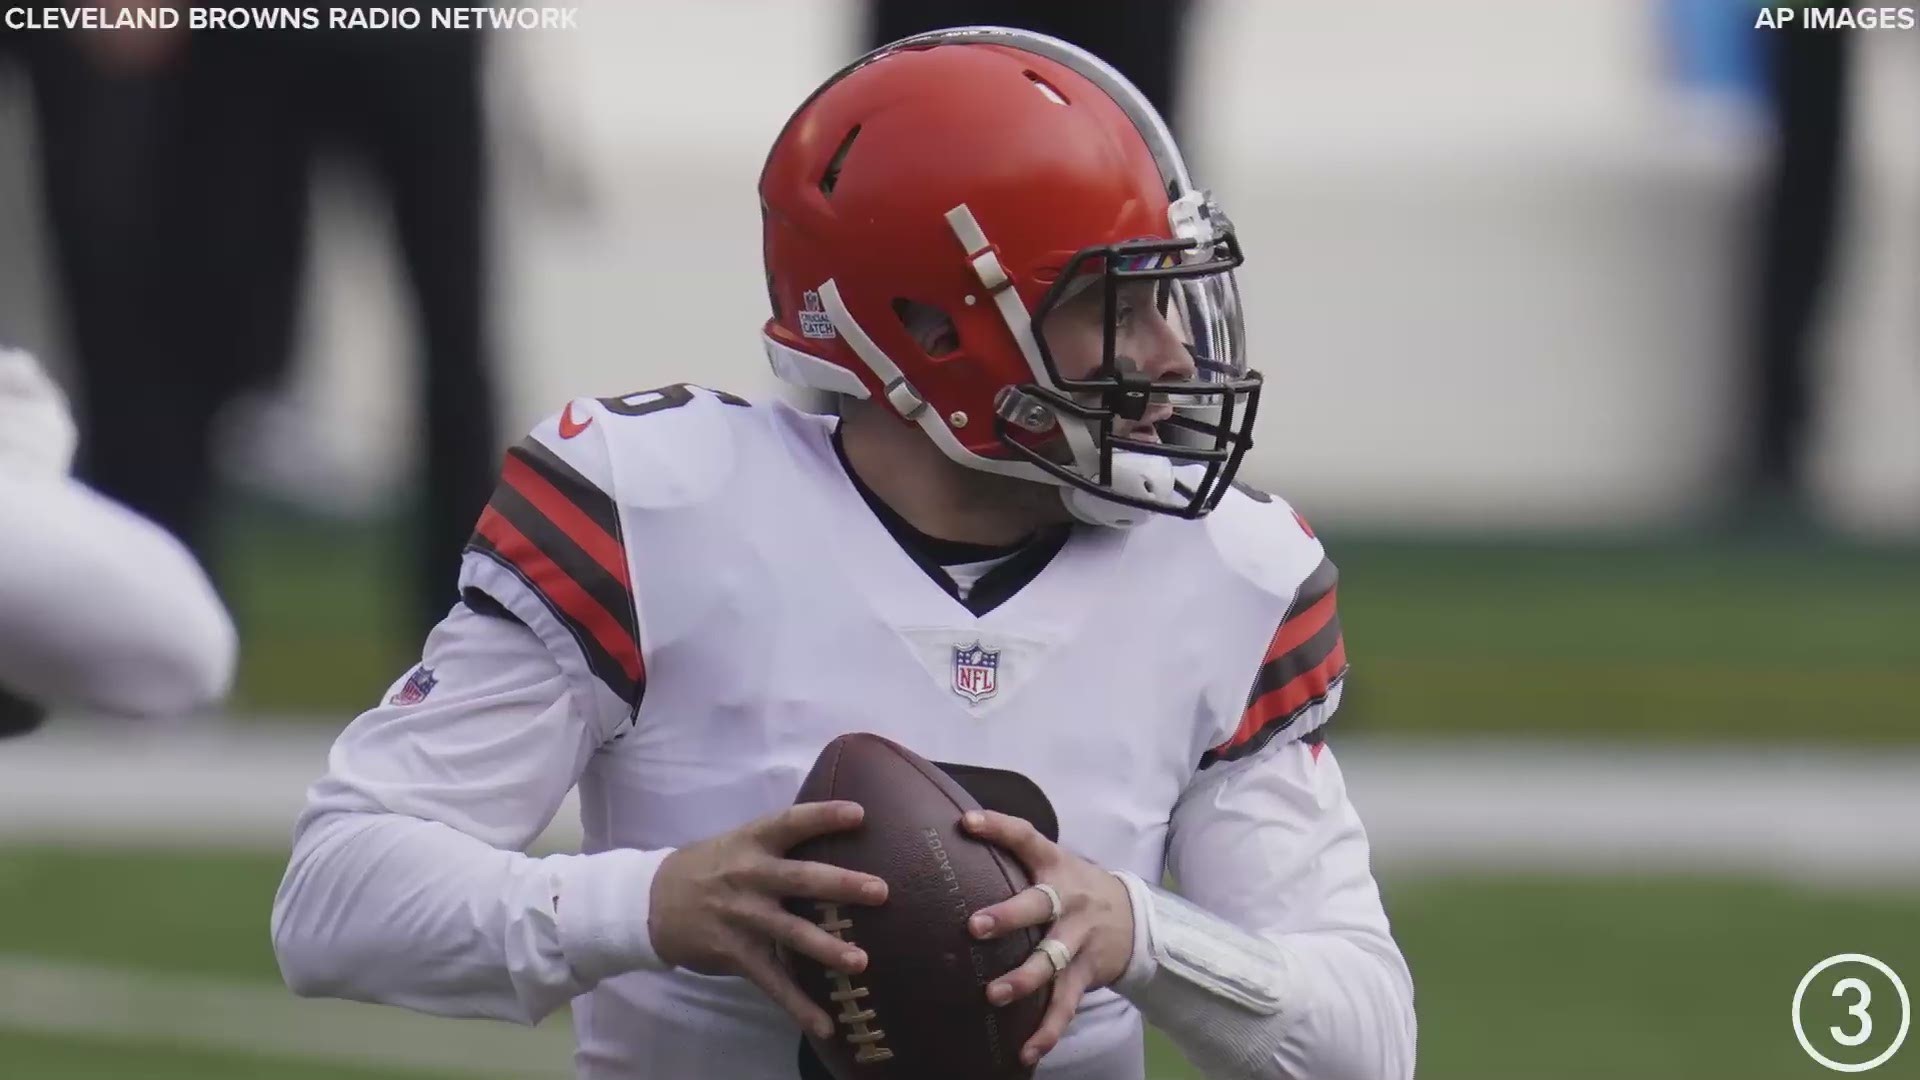 Cleveland Browns quarterback Baker Mayfield found tight end Harrison Bryant for a 3-yard touchdown pass to tie the Cincinnati Bengals 10-10.